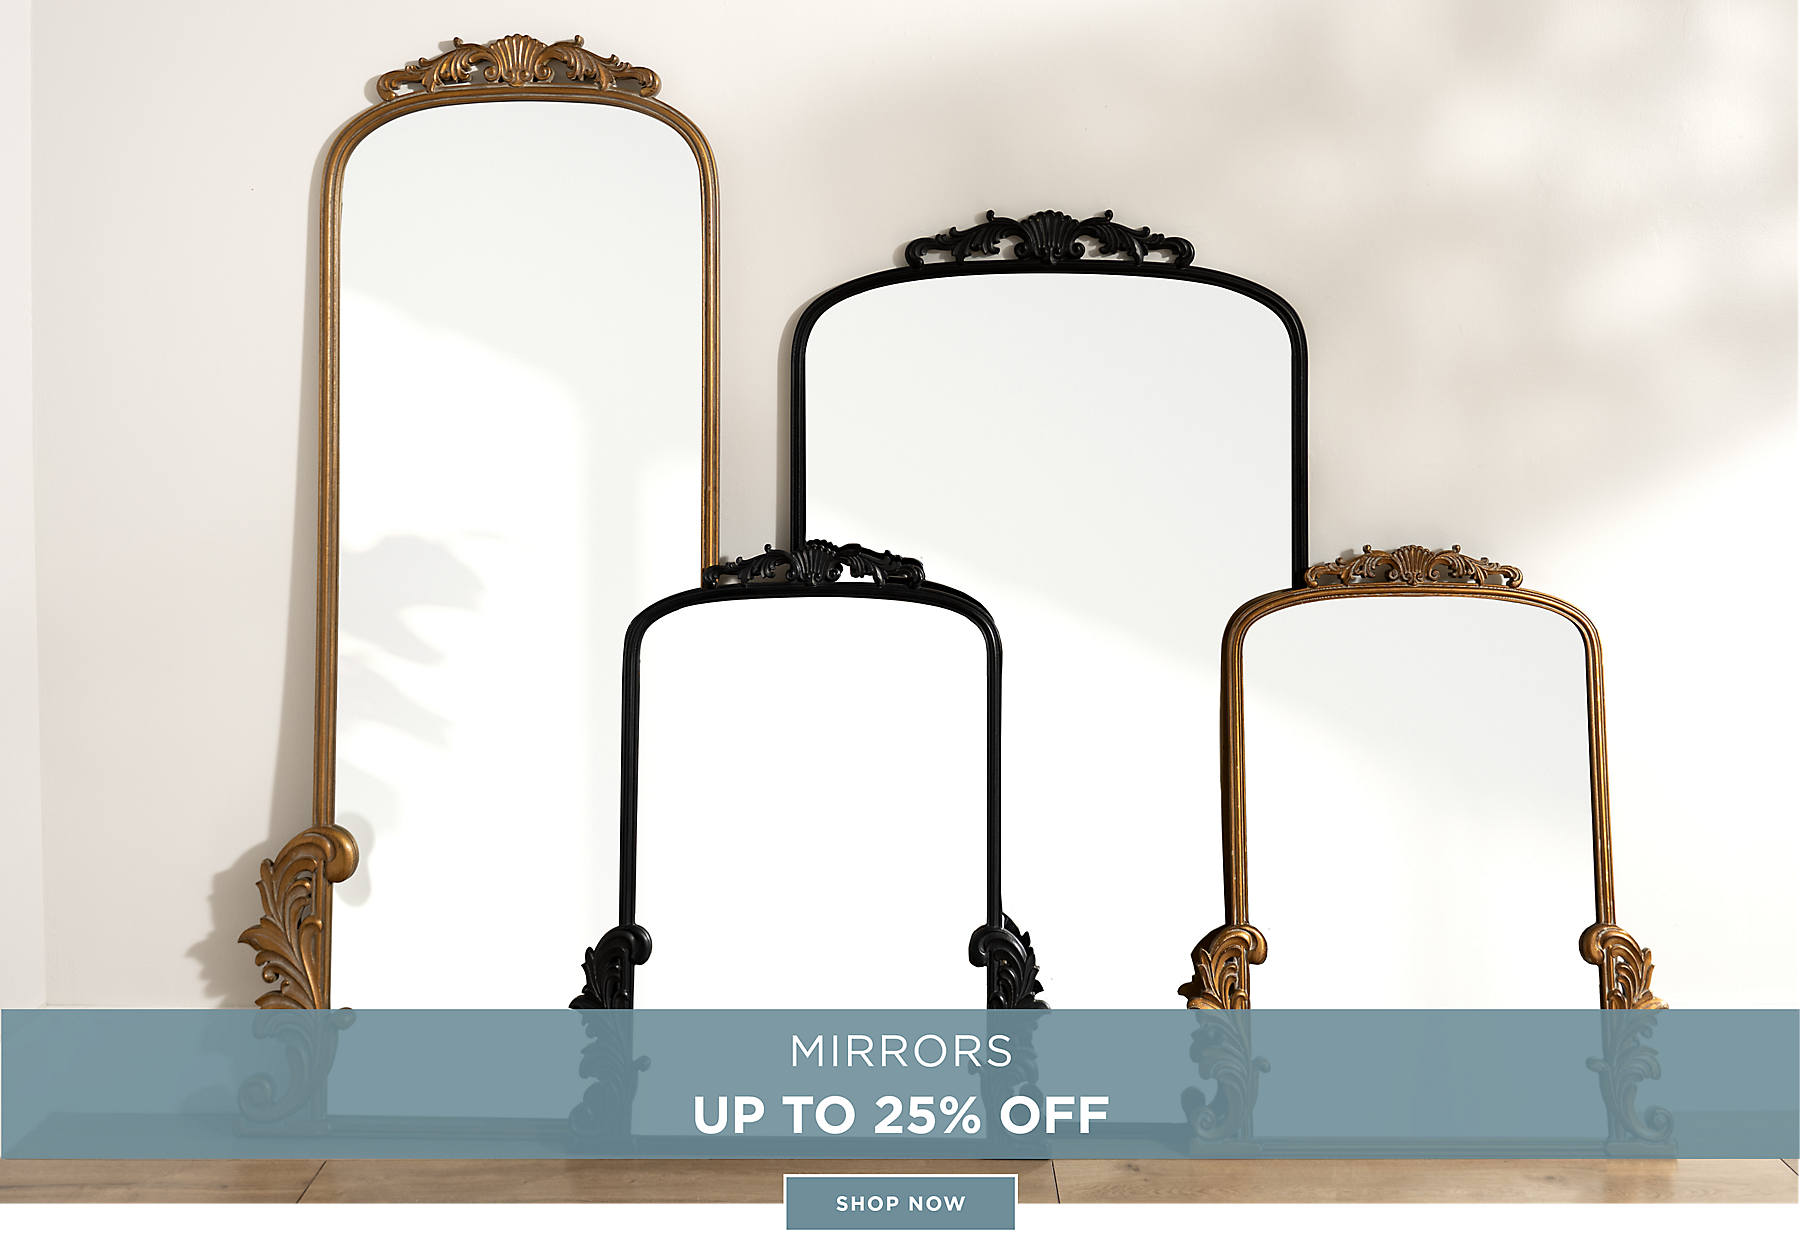 Mirrors Up to 25% Off Shop Now